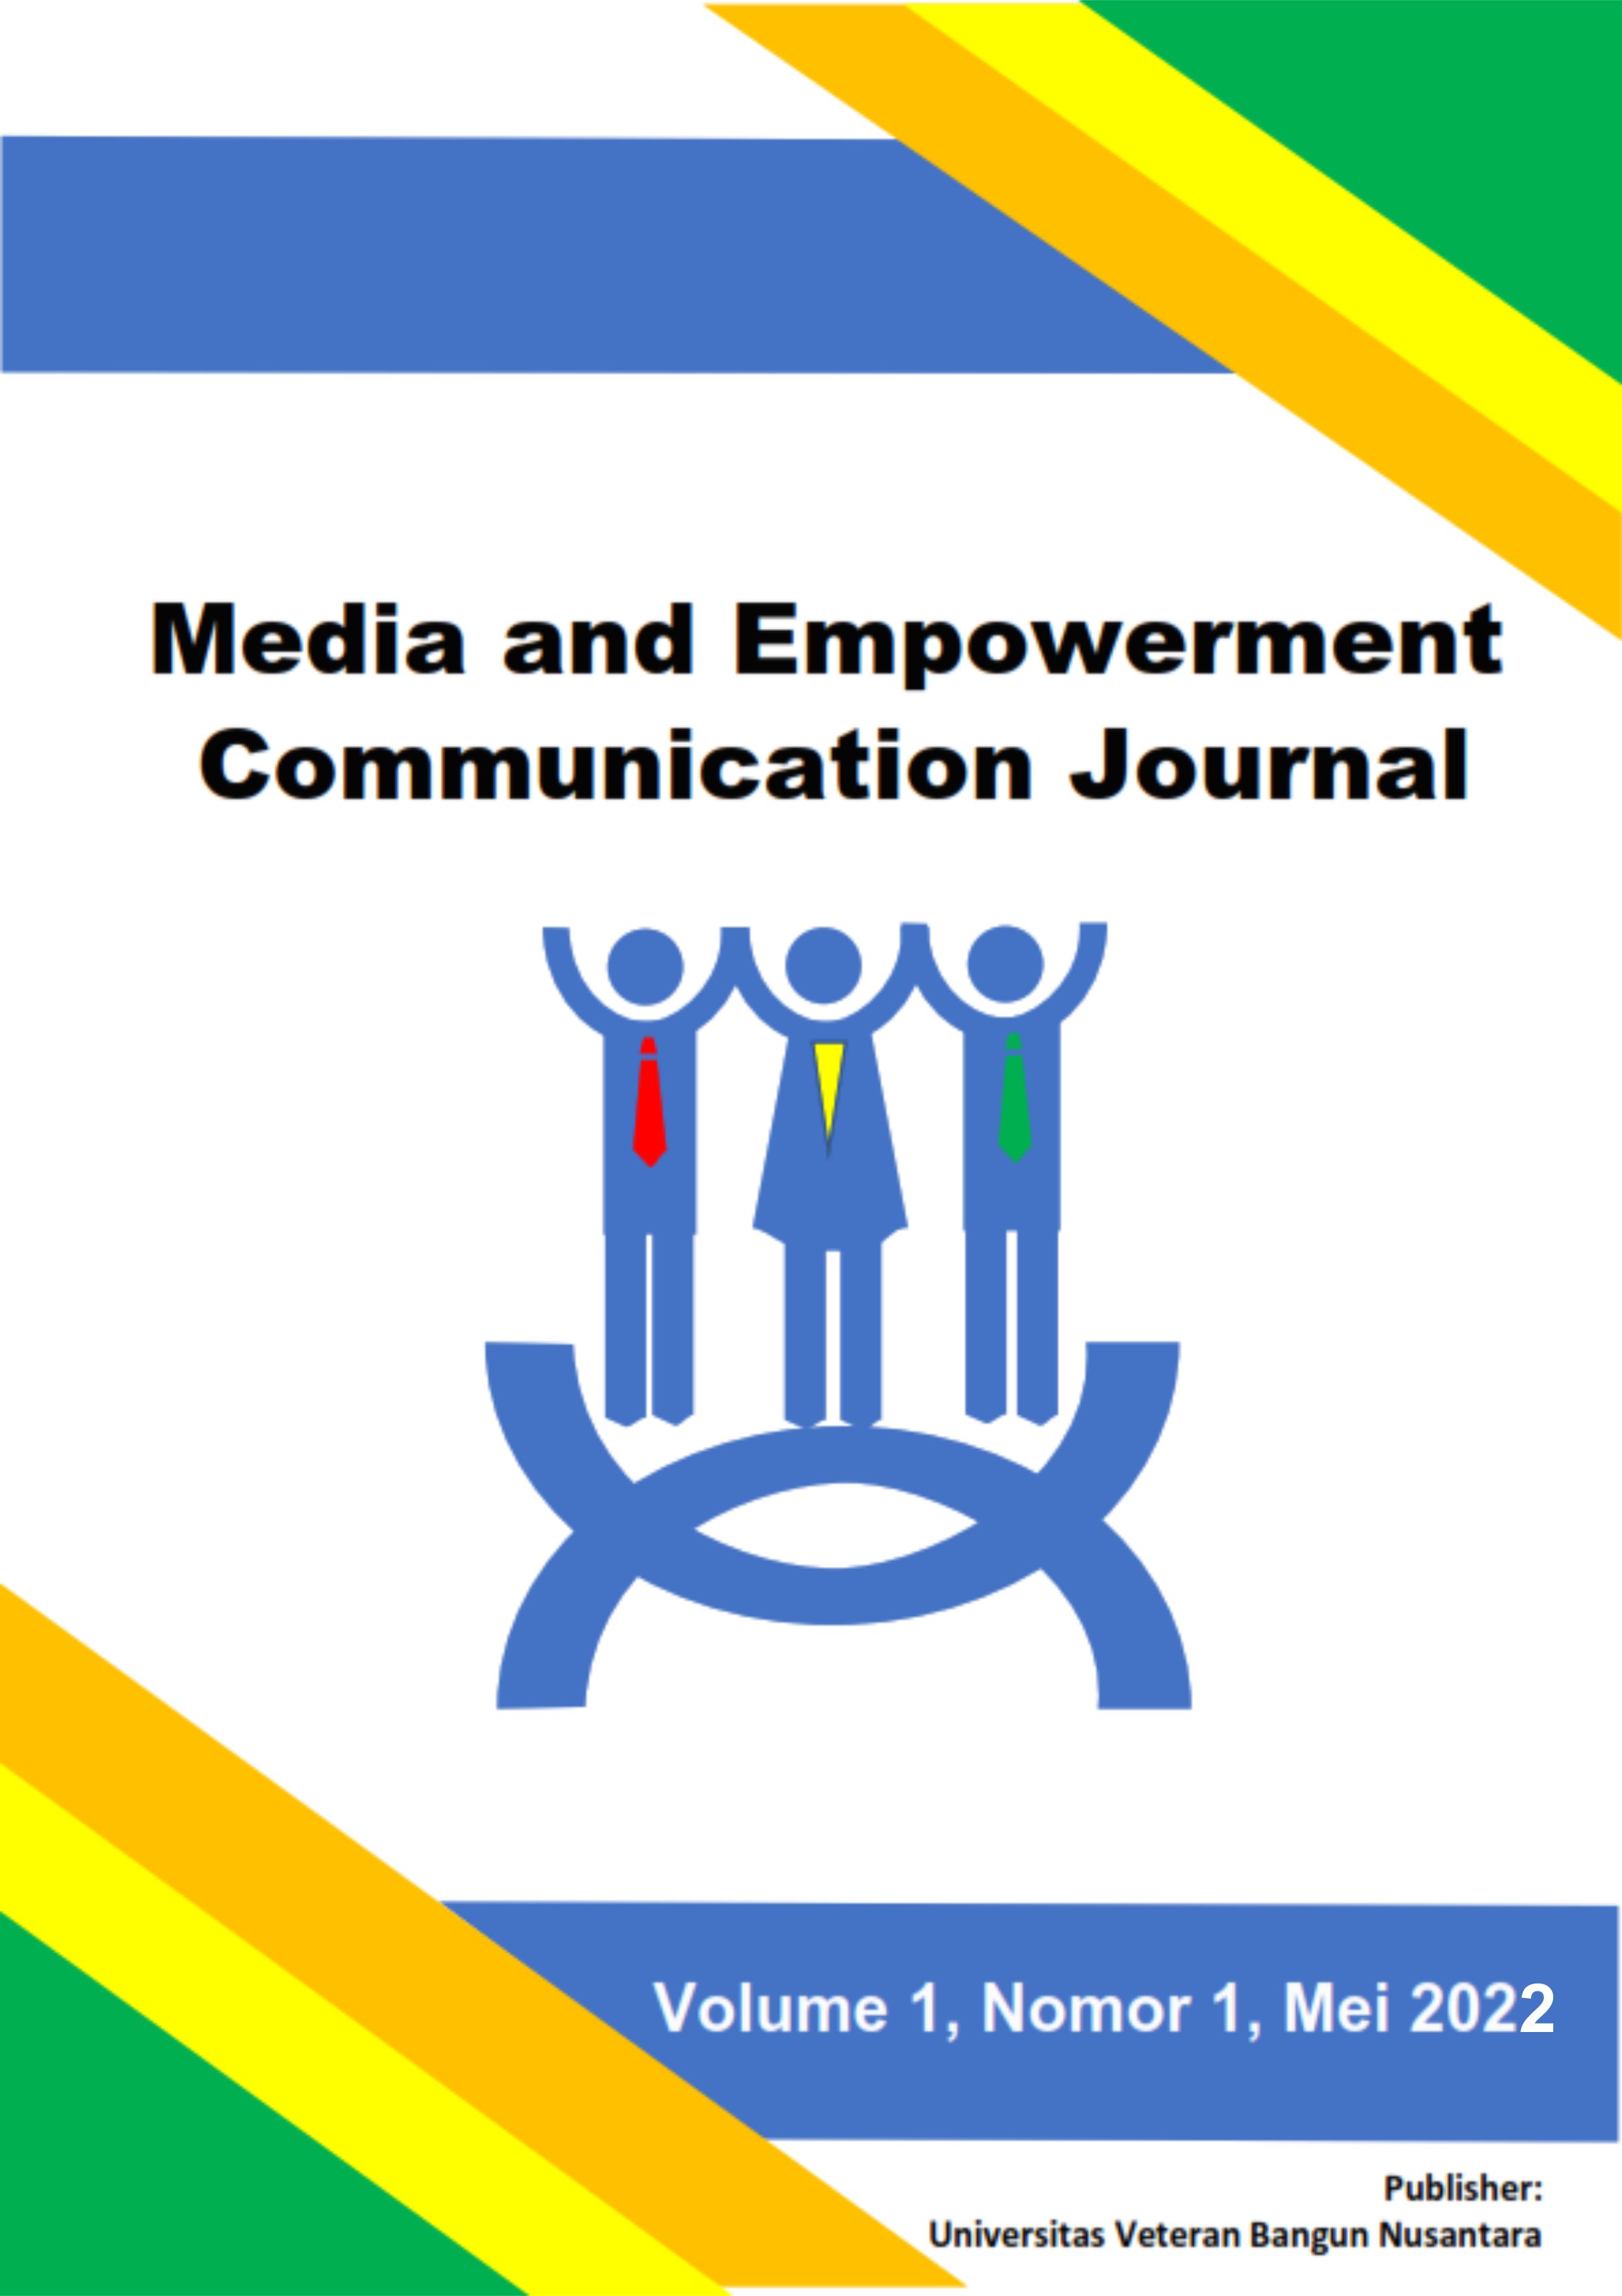 					View Vol. 1 No. 1 (2022): Media and Empowerment Communication Journal
				